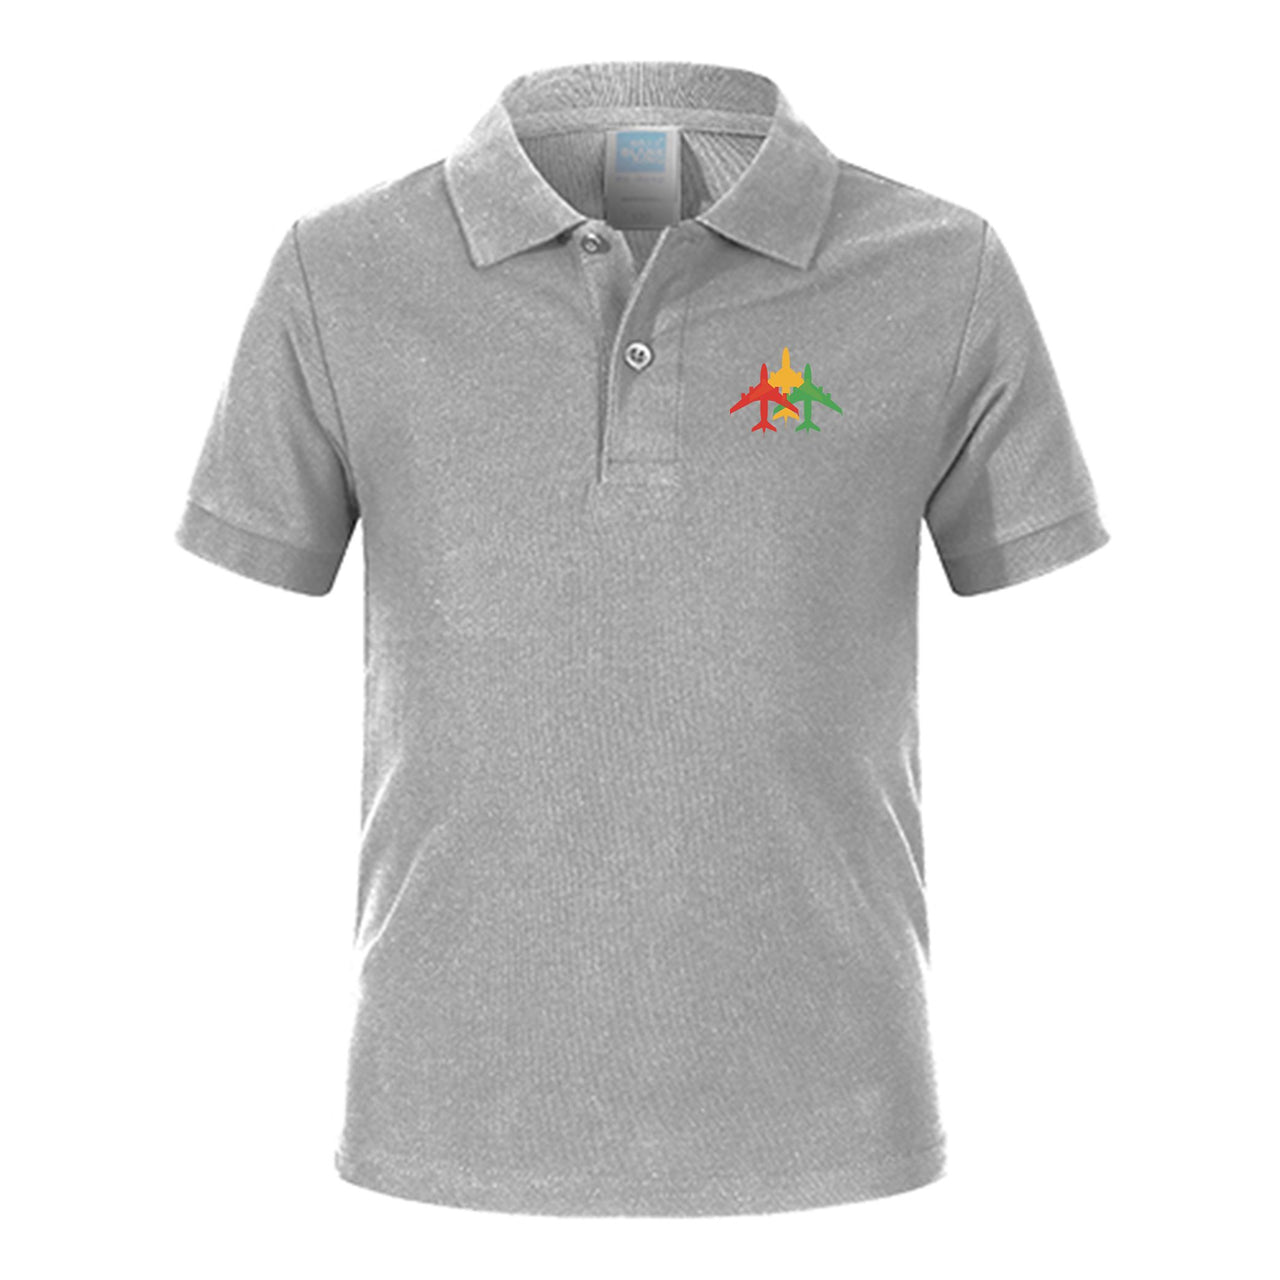 Colourful 3 Airplanes Designed Children Polo T-Shirts